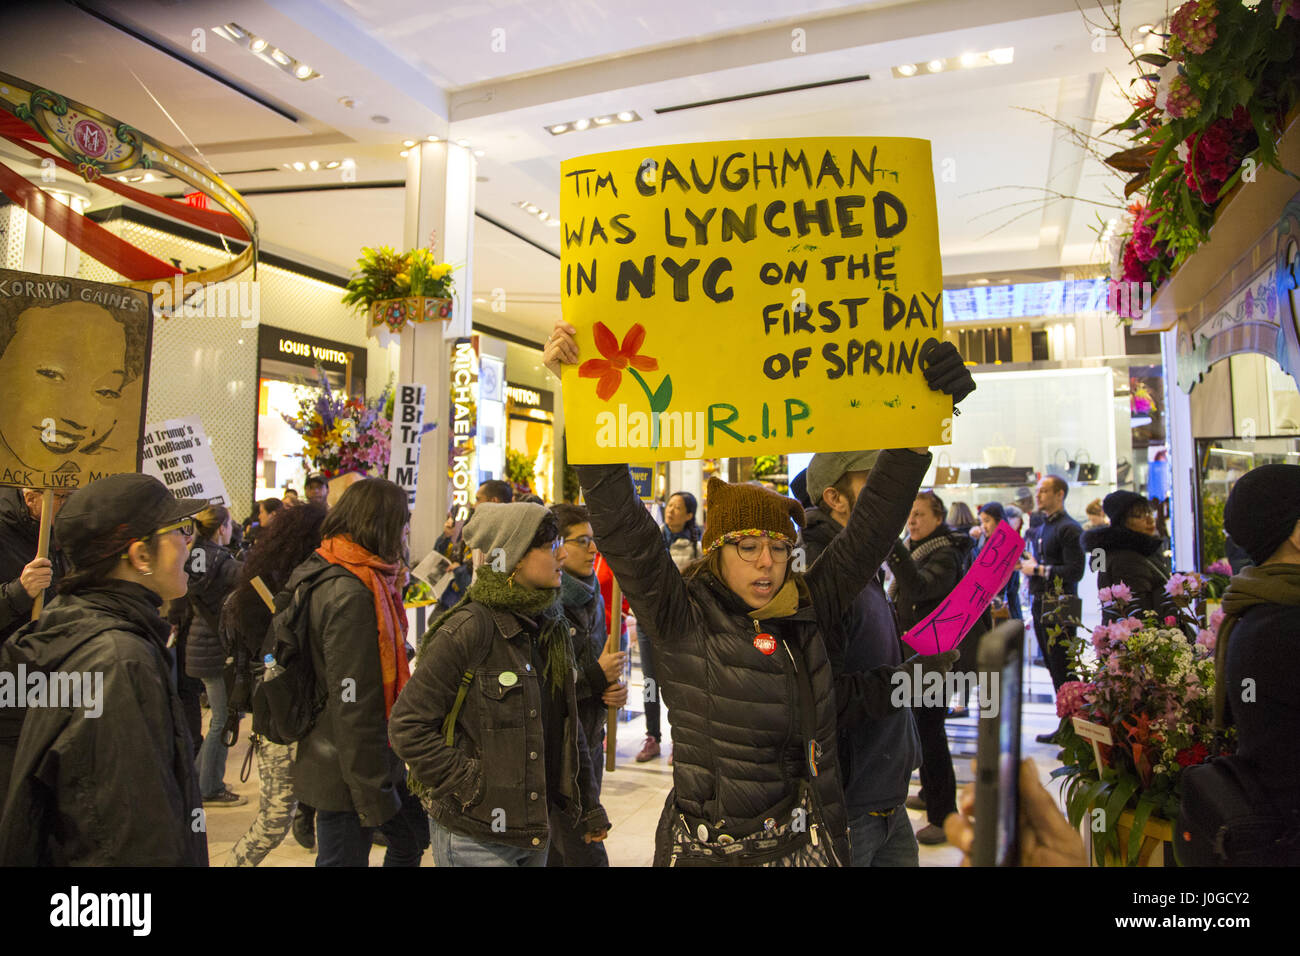 Black Lives Matter demonstrators and others protesting police brutality & bias against minorities march through the ground floor of Macy's Department Store at 34th and Broadway in Manhattan, New York City. Stock Photo